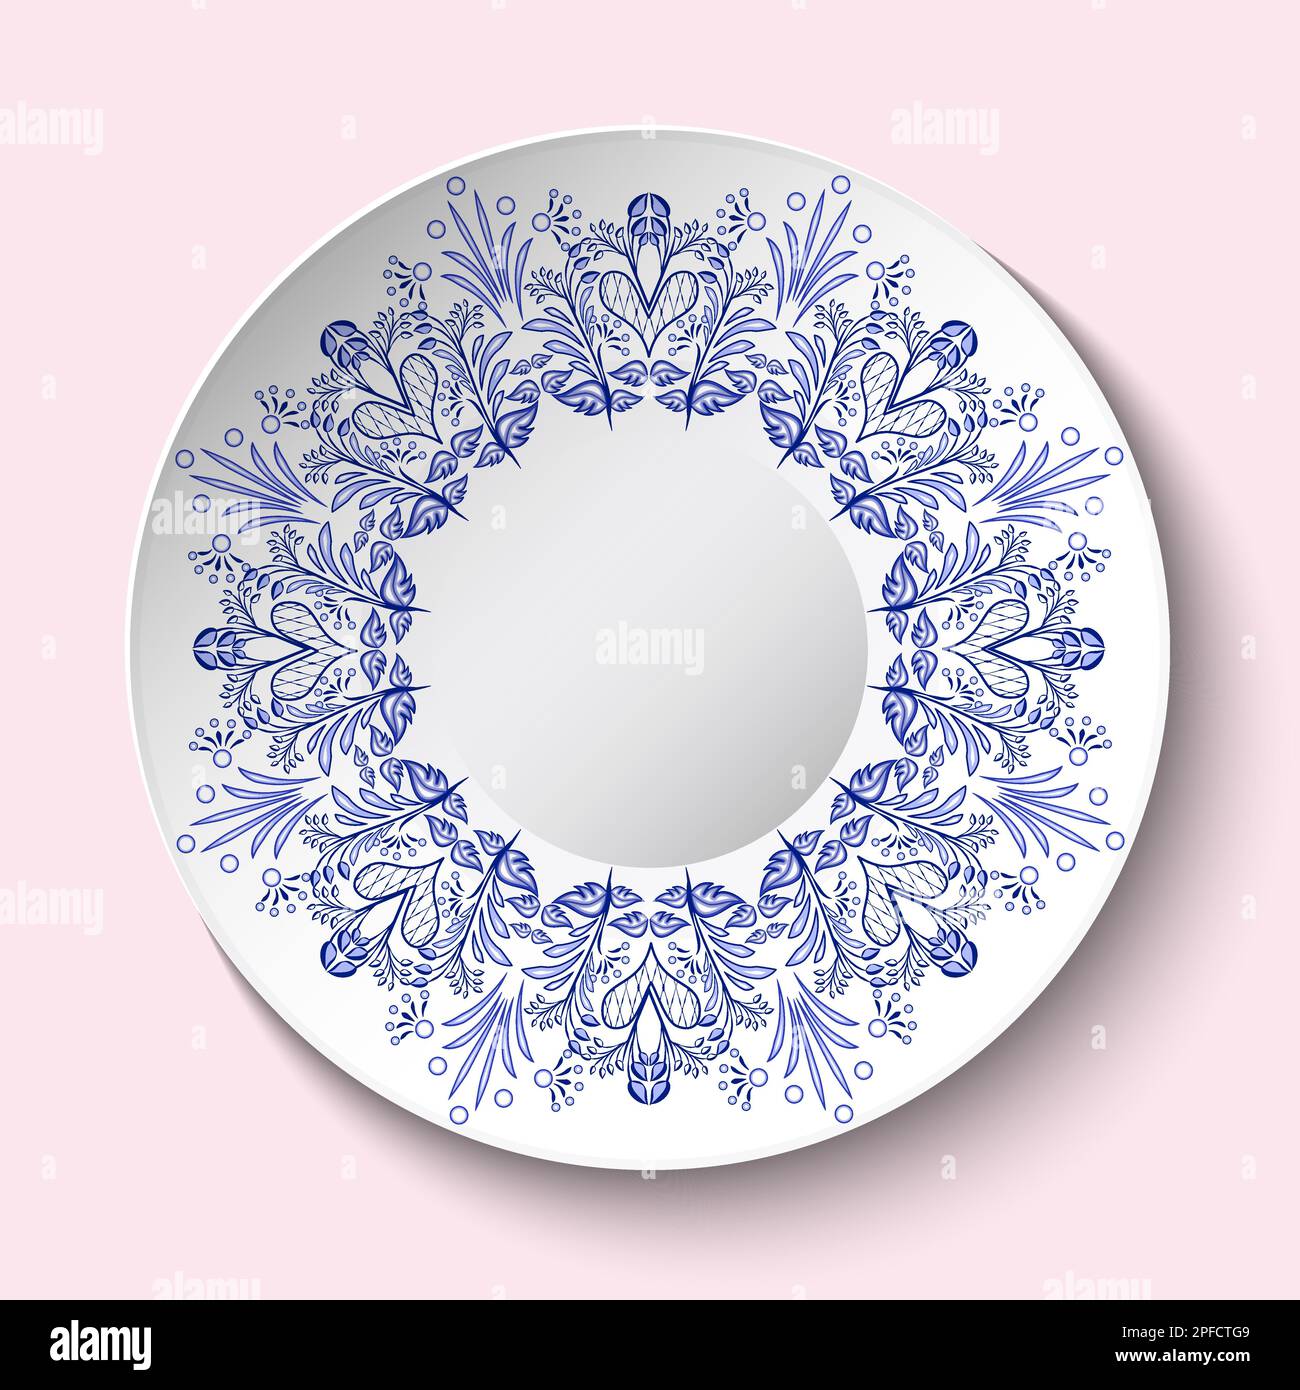 Porcelain dish with circular blue floral pattern. Plate and decor on white in oriental asian style. Ceramic saucer with national cobalt flower paintin Stock Vector